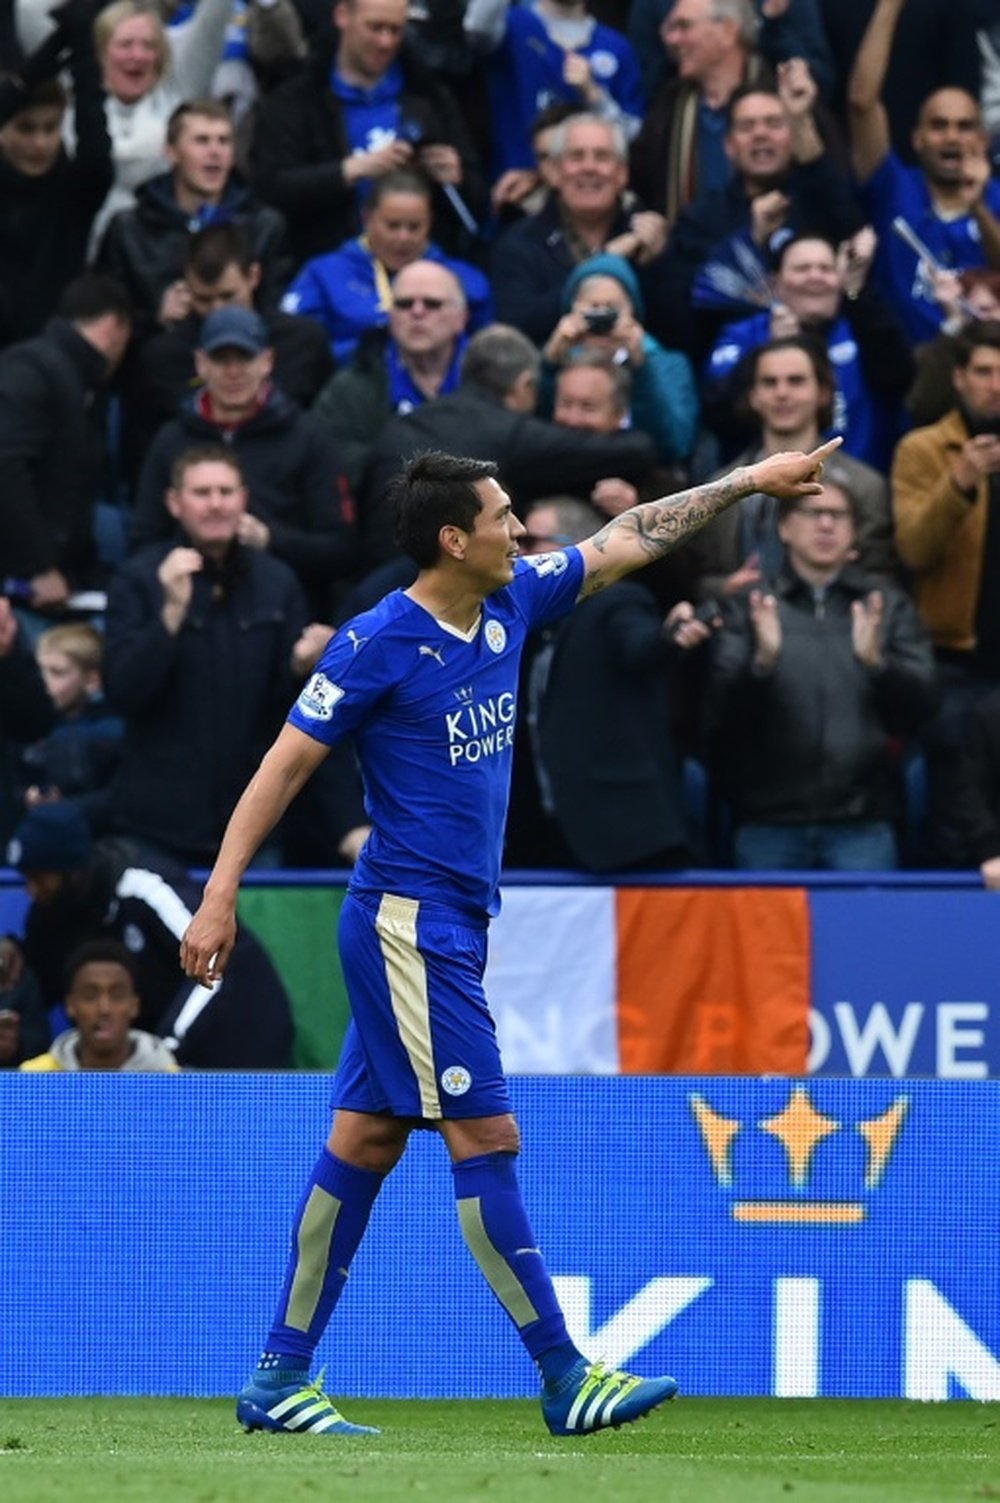 Ulloa lifted the Premier League trophy with Leicester last season. BeSoccer